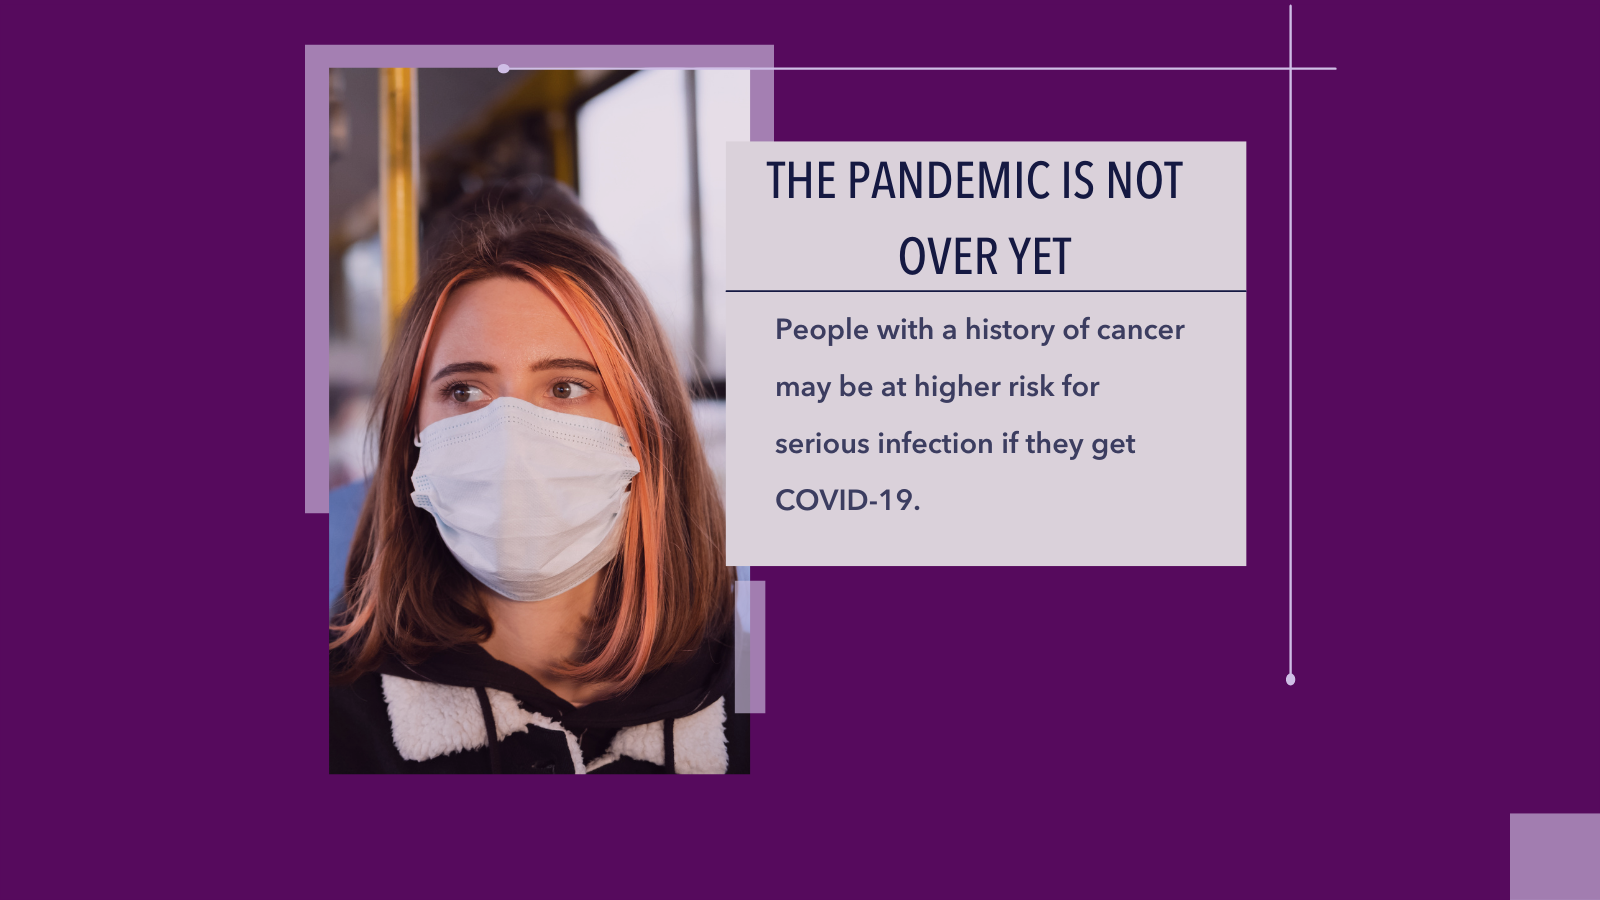 Masked woman riding on bus. Adjacent text reads: The pandemic is not over yet. People with a history of cancer may be at higher risk for serious infection if they get COVID-19. 